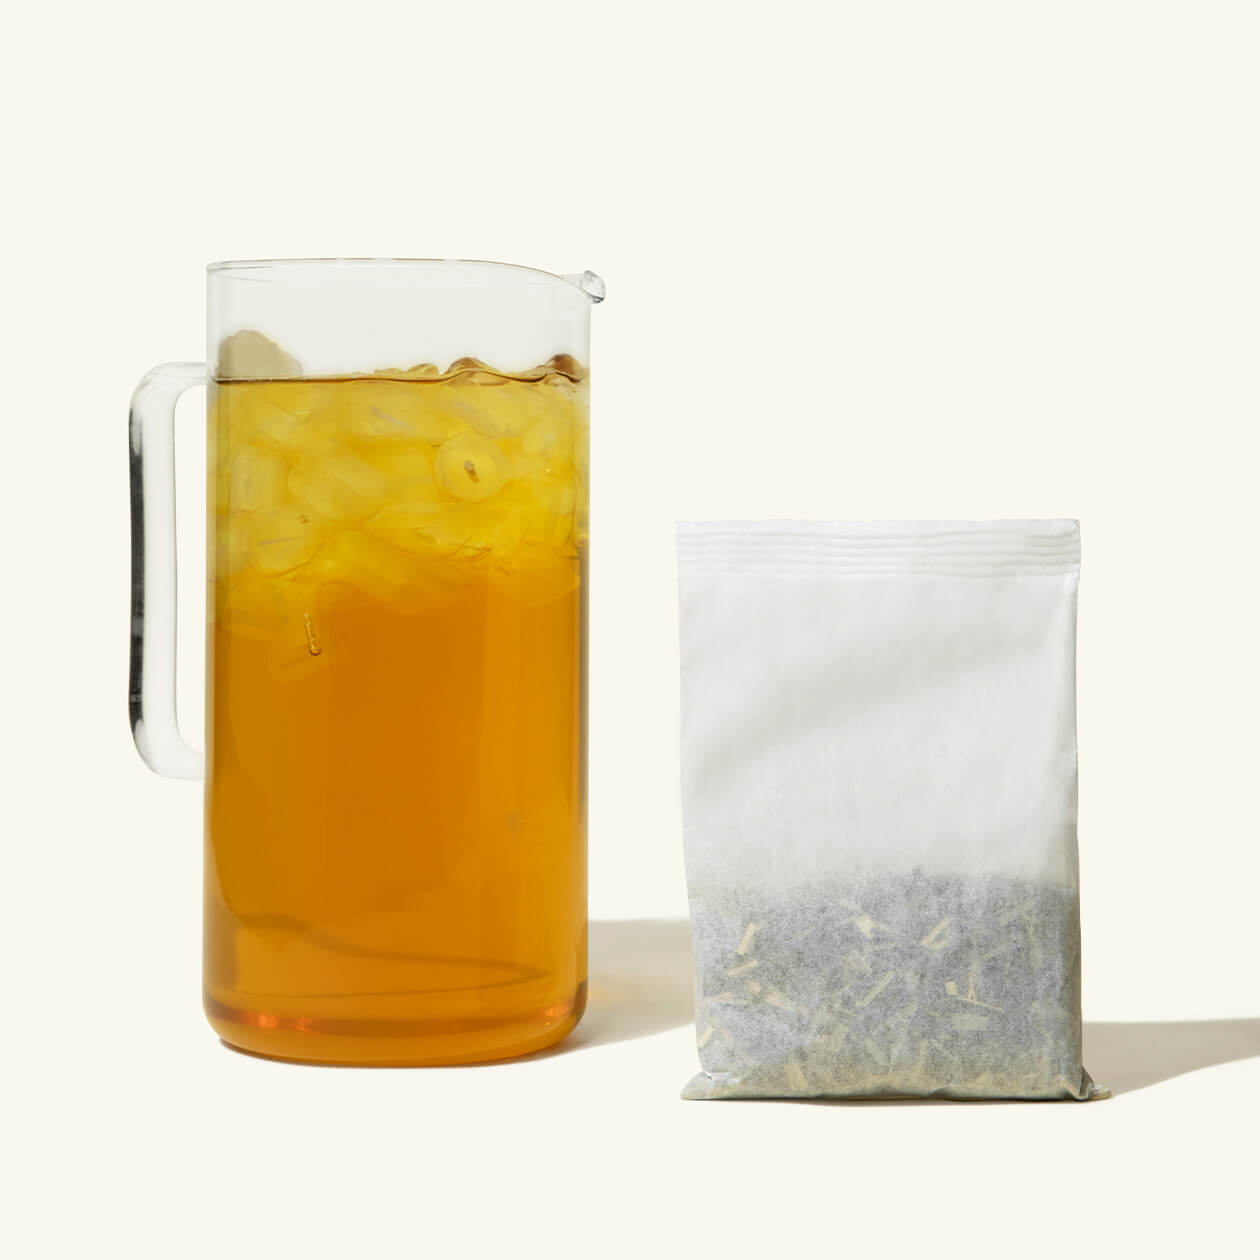 A pitcher of Numi Citrus Green Iced Tea with a gallon iced tea pouch